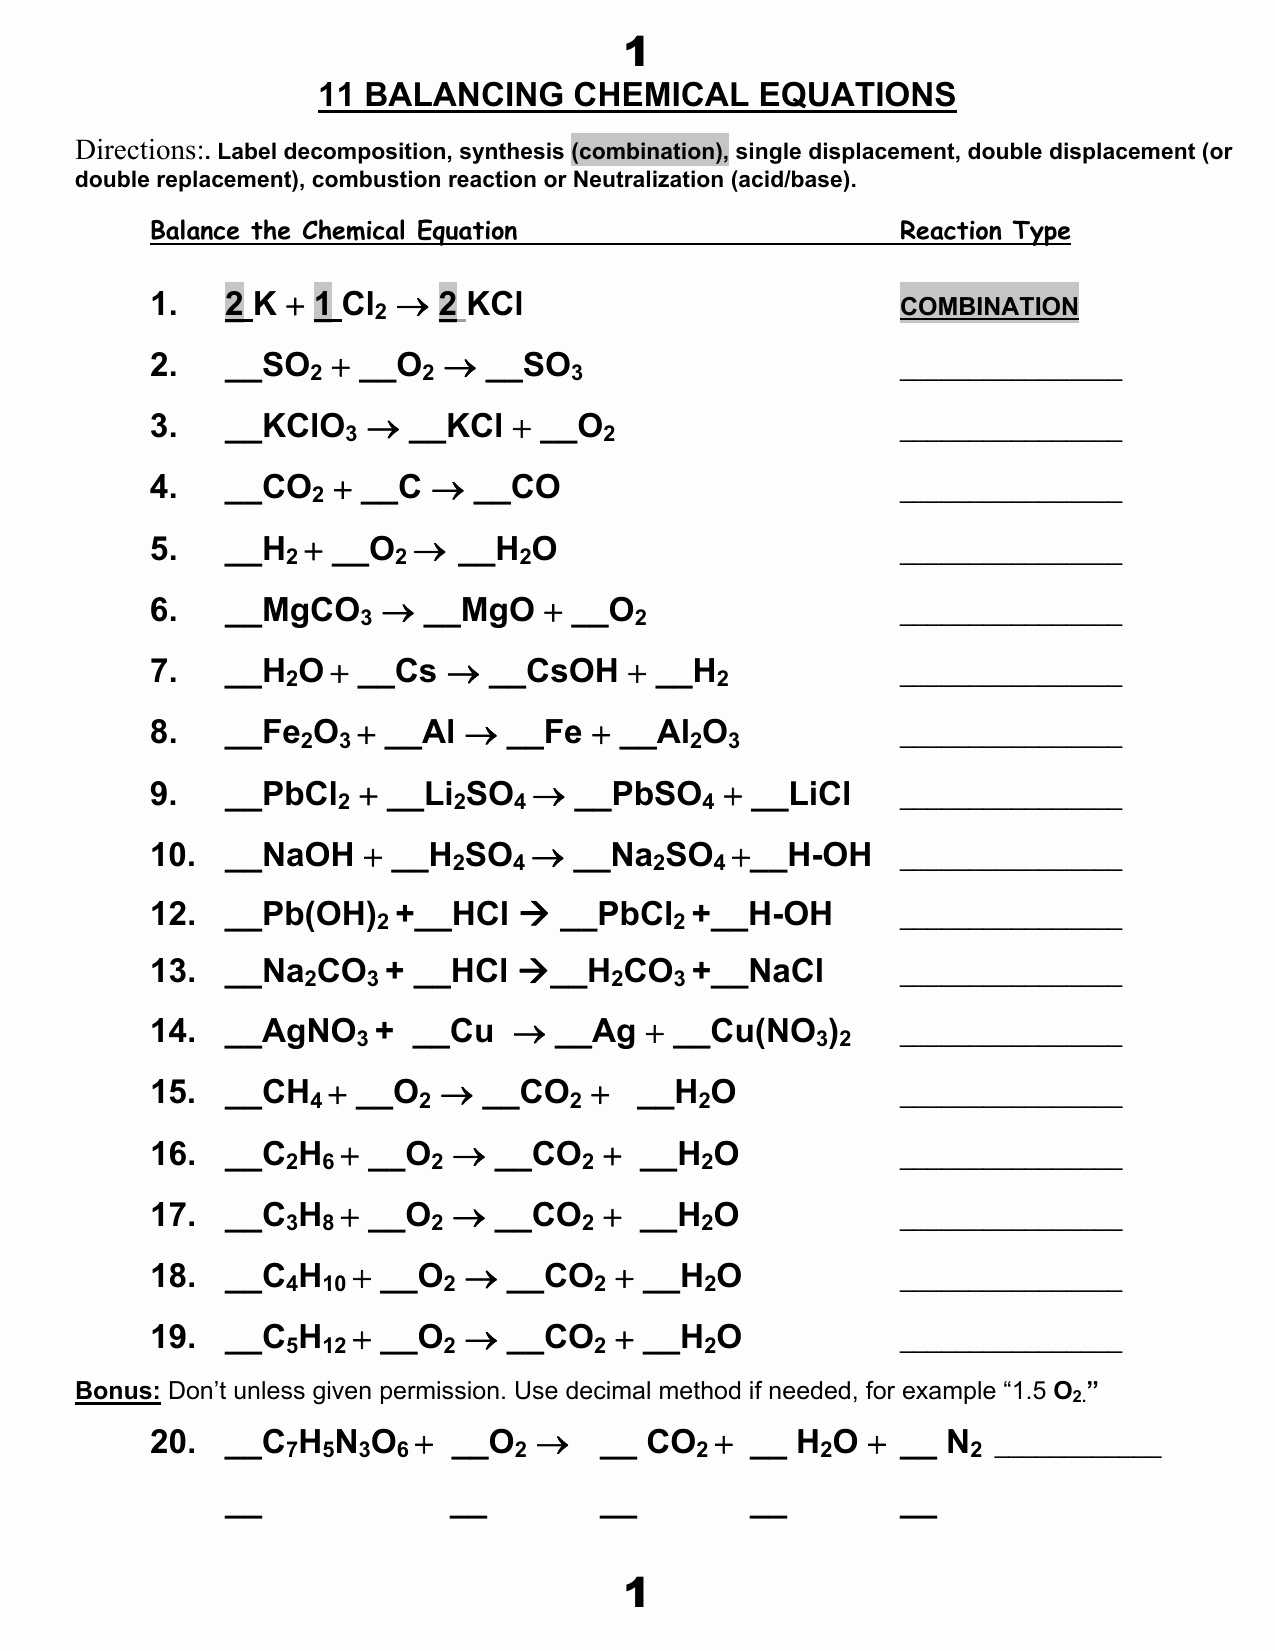 Chemical Reaction Worksheet Answers with Chemical Equation Worksheet Types Reactions Kidz Activities